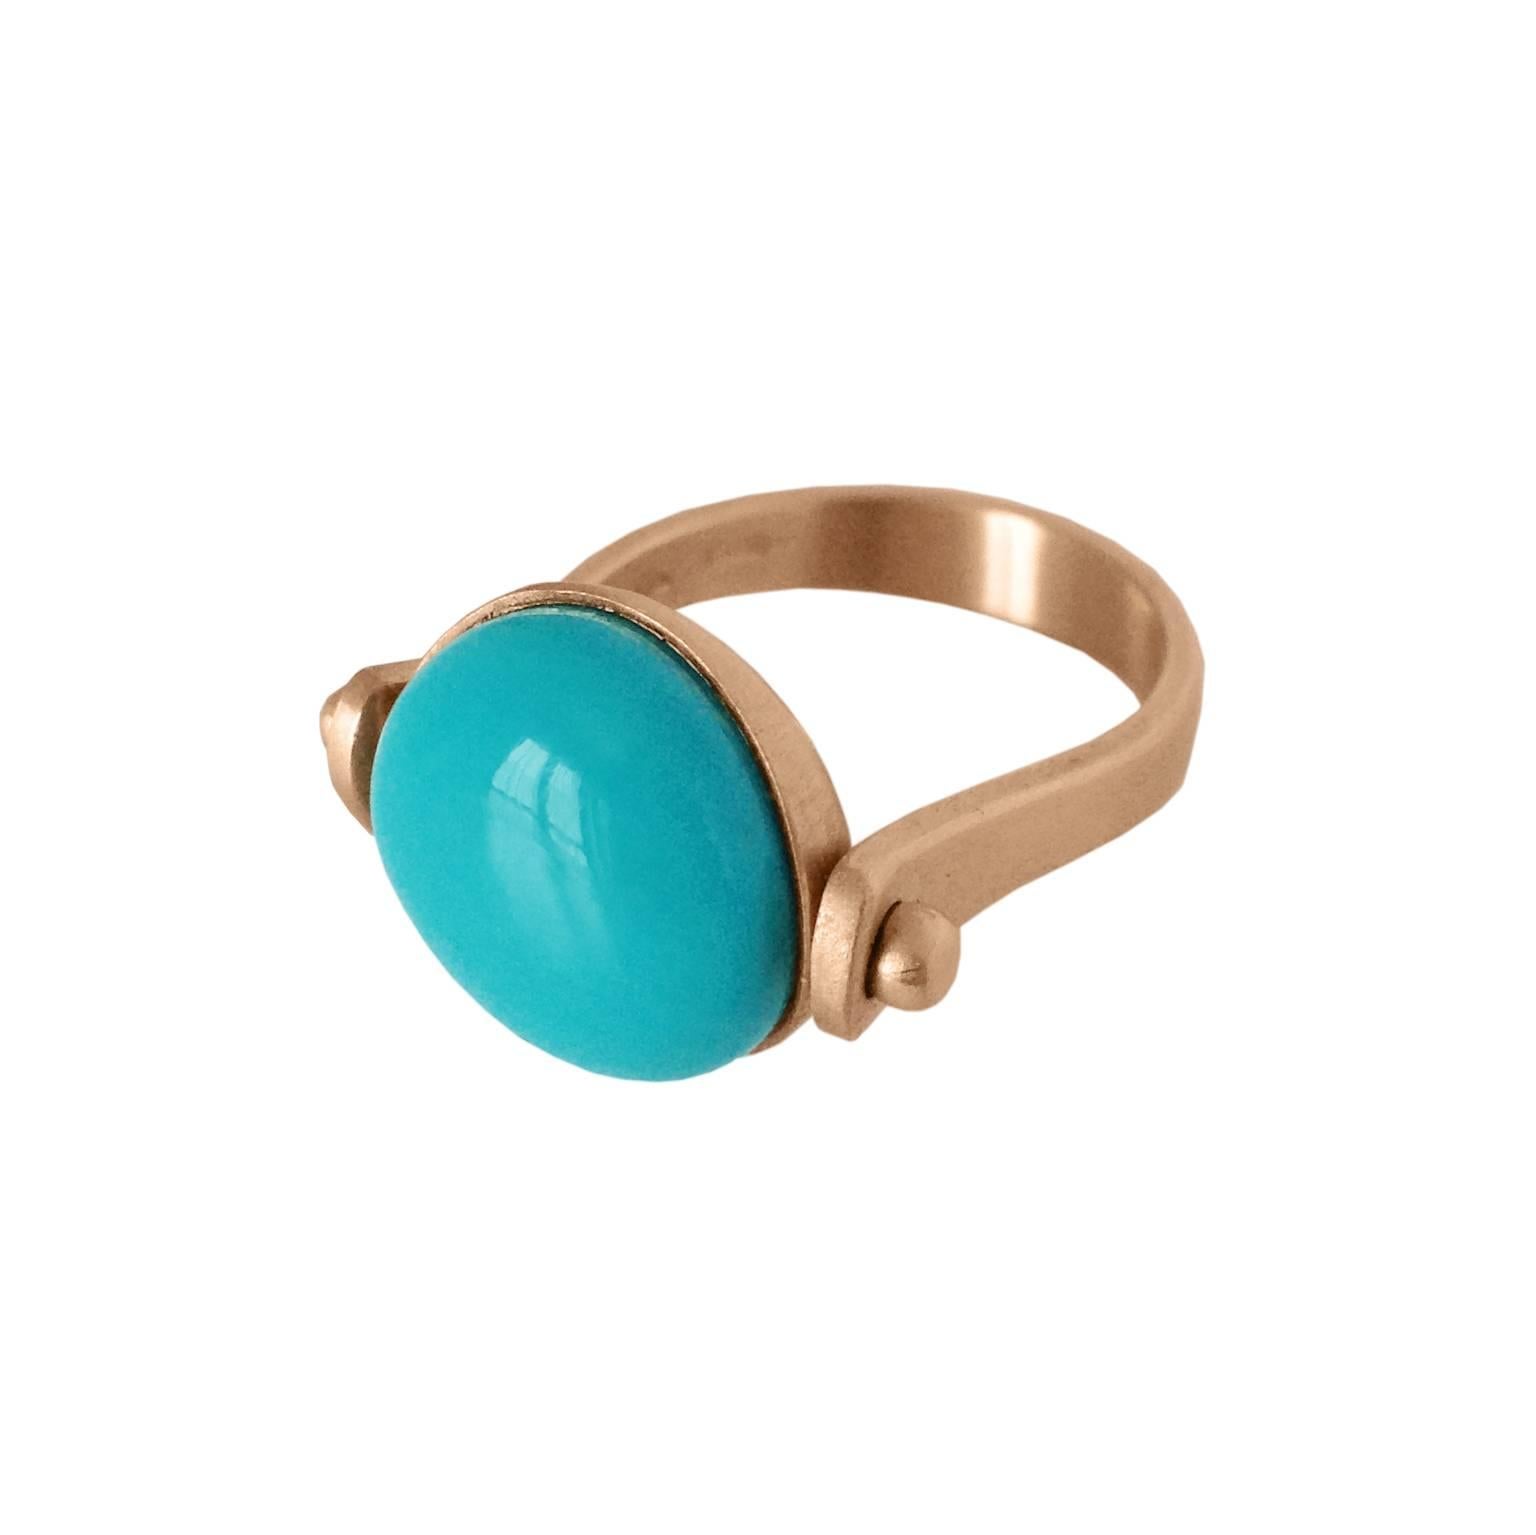 Italian Gemstone Turquoise Red 18 Kt Gold Roman Style Reversible Ring Made in Italy
This ring is inspired by ancient Roman jewelry. They used to wear a ring where its head would be round. There's a light blue round turquoise as a button above and if